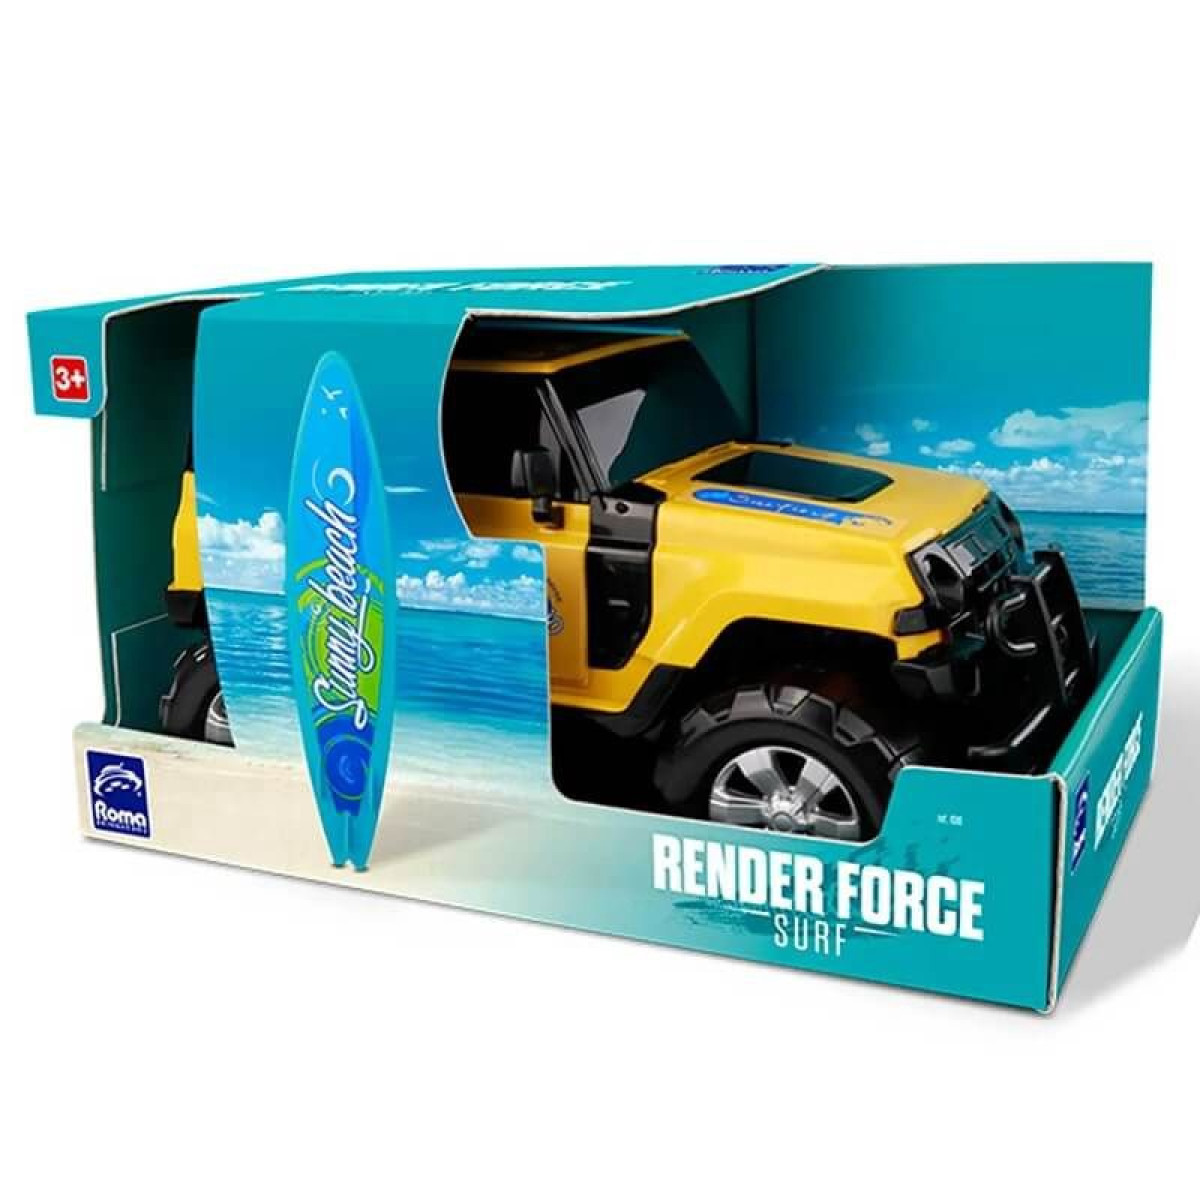 ROMA RENDER FORCE SURF 1016